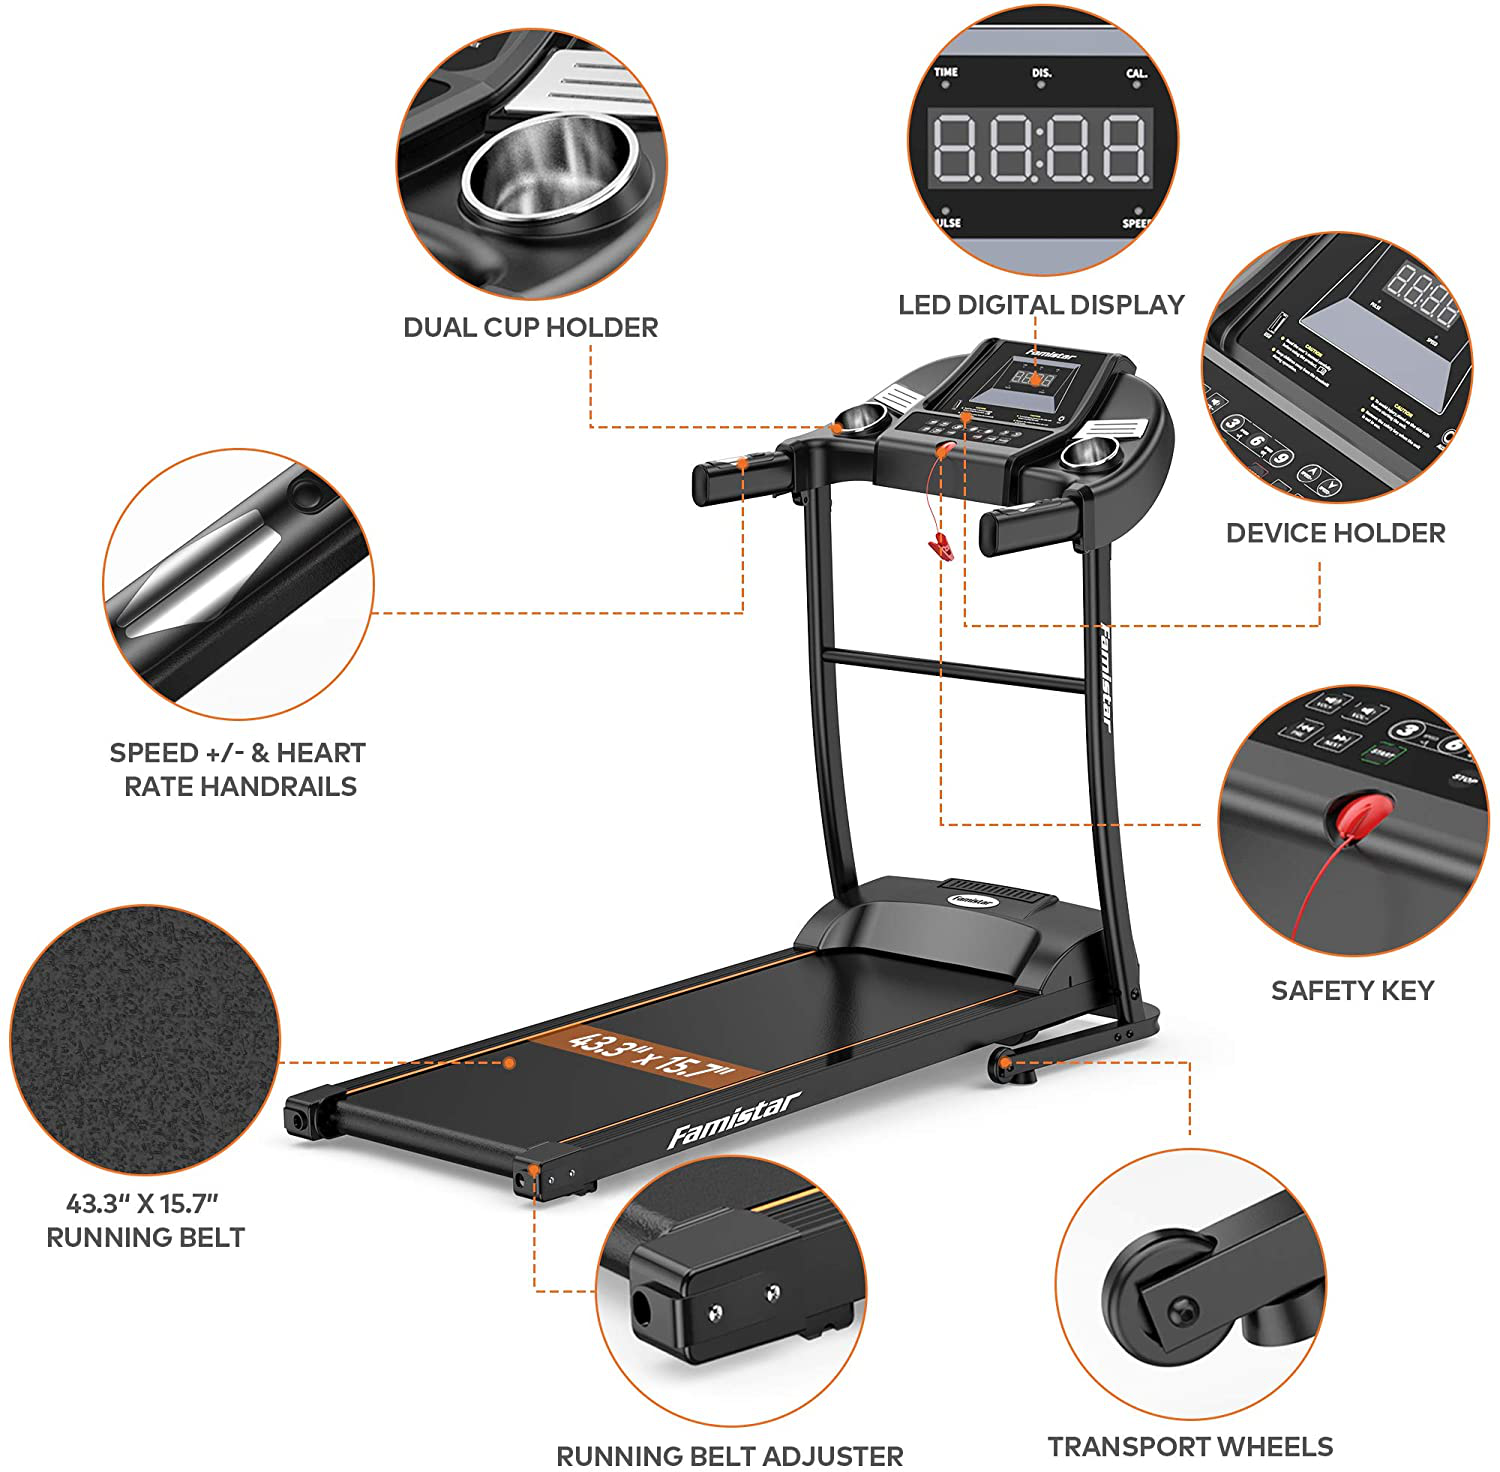 Treadmill with Incline for Home - Famistar Space Saving Electric Treadmill Running Machine for Home Jogging Running Walking with 3 Modes | MP3 Player | 12 Programs | LCD Display Folding and Compact Design Animals & Pet Supplies > Pet Supplies > Dog Supplies > Dog Treadmills Famistar   